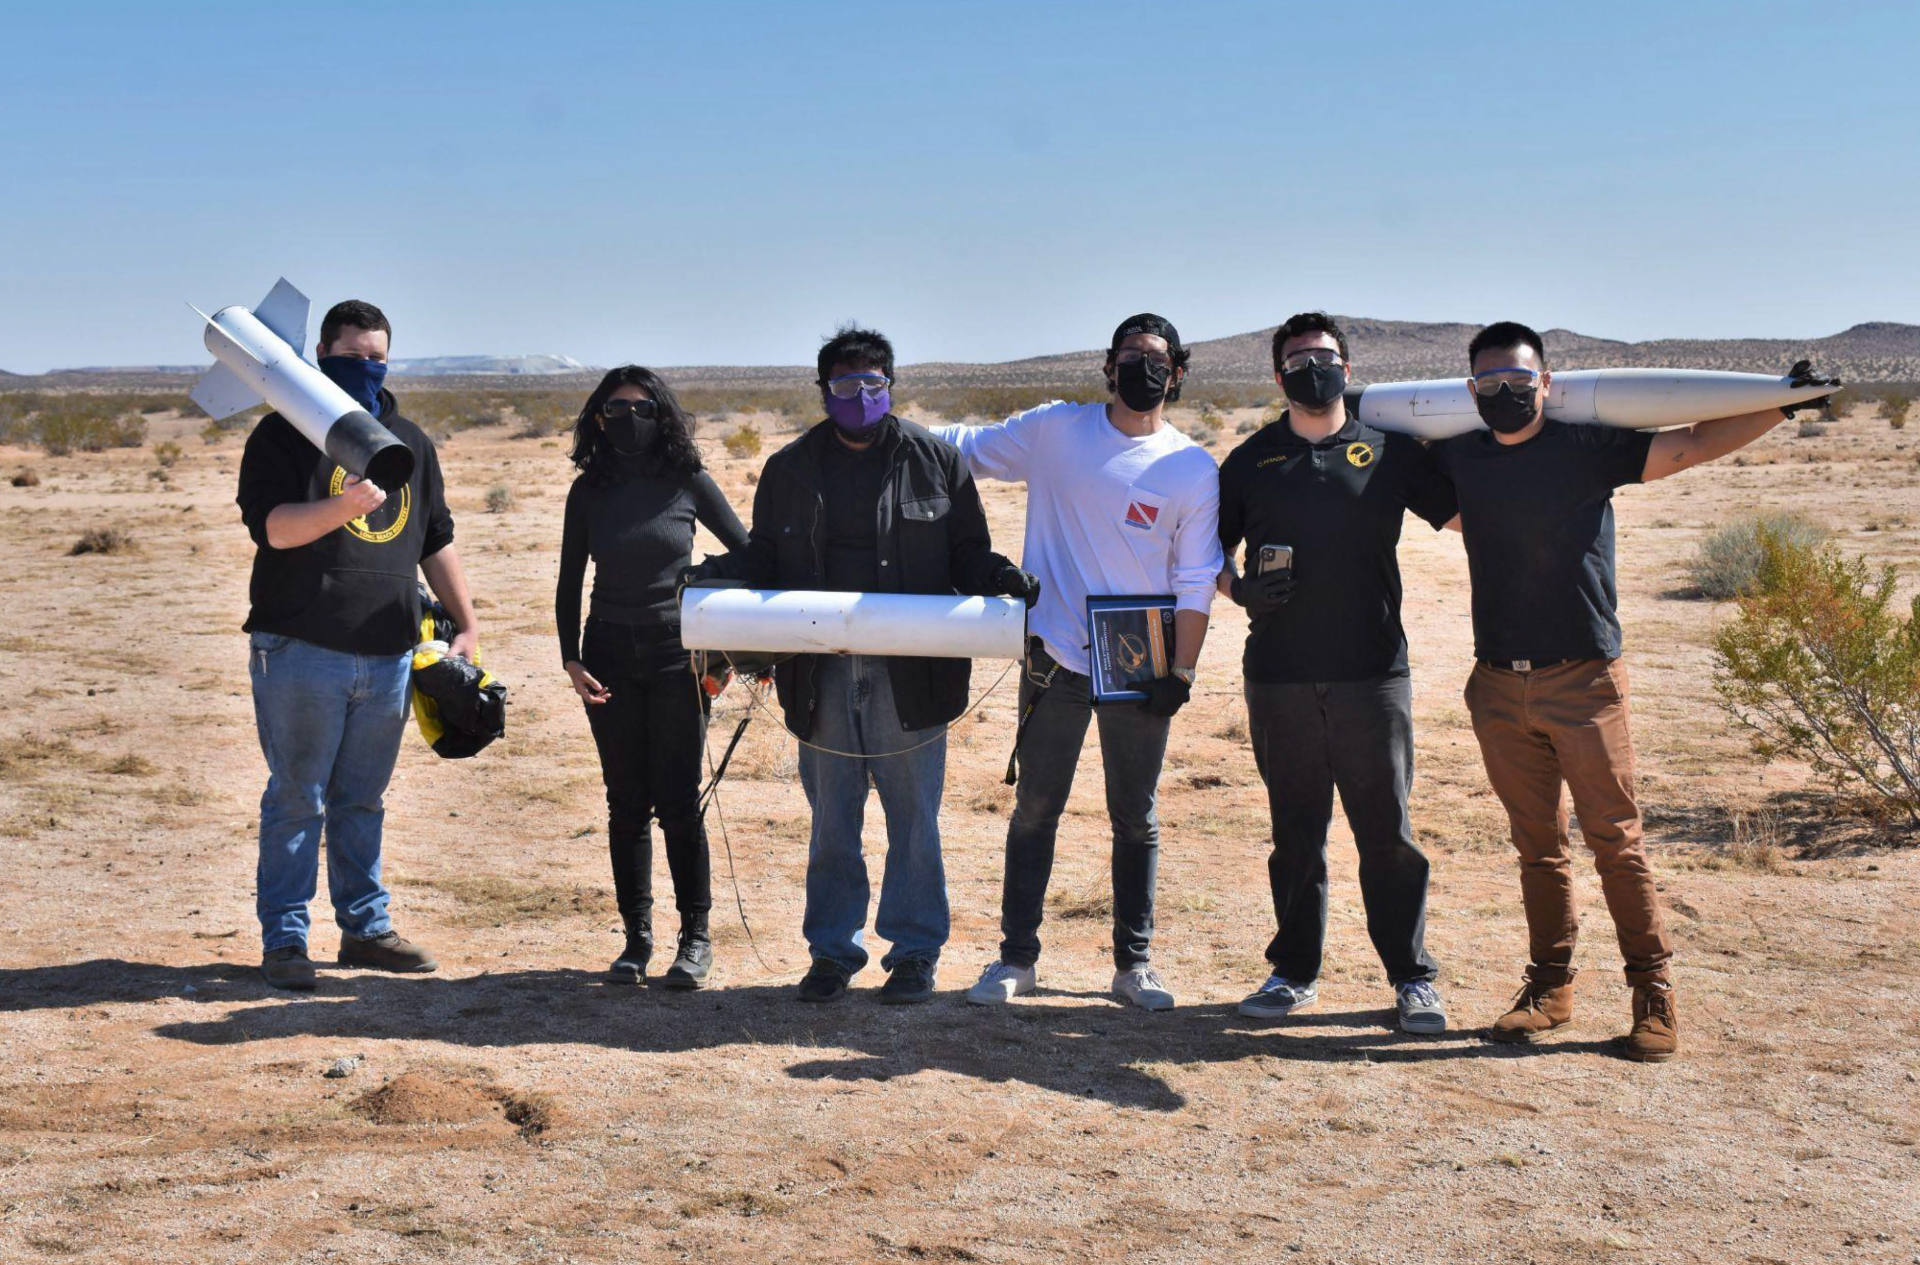 csulb rocketry team holds rocket